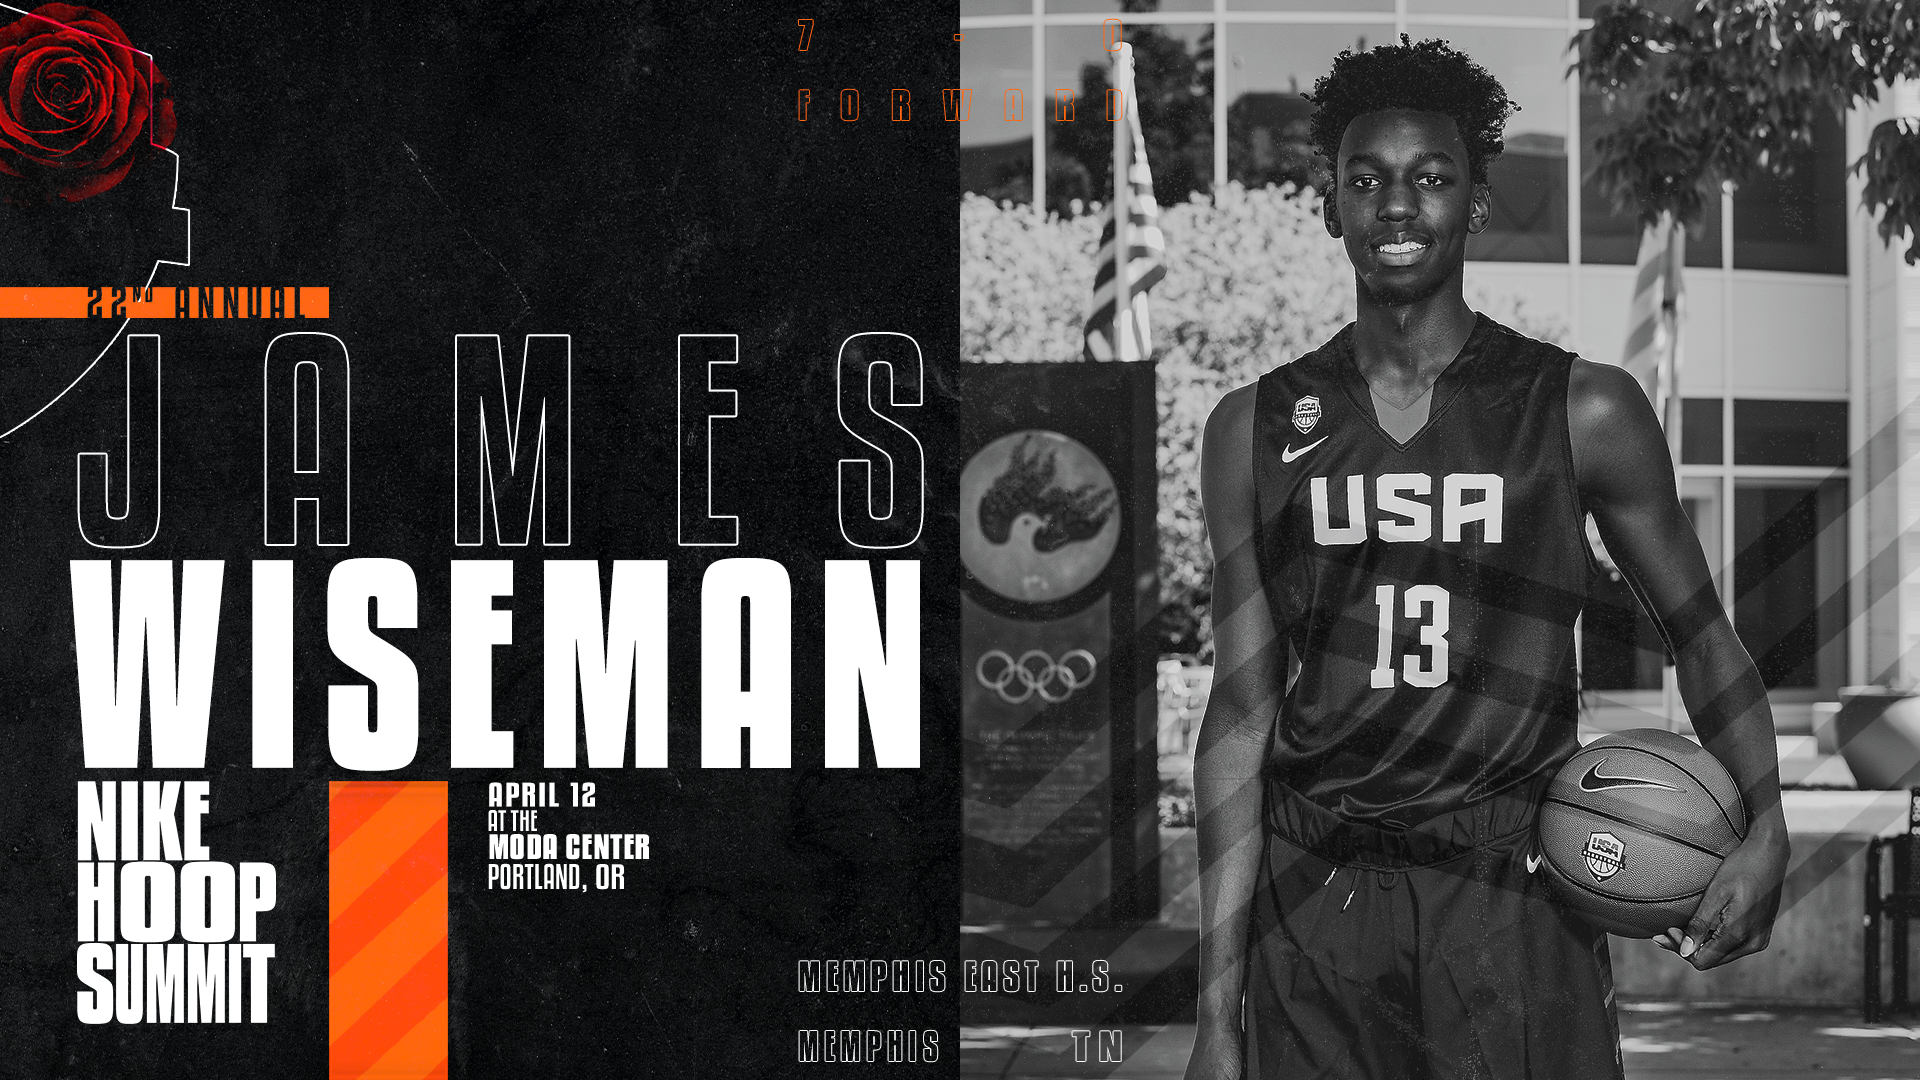 Character Counts for James Wiseman, Gatorade Player of the Year and Nike Hoop Summit Center